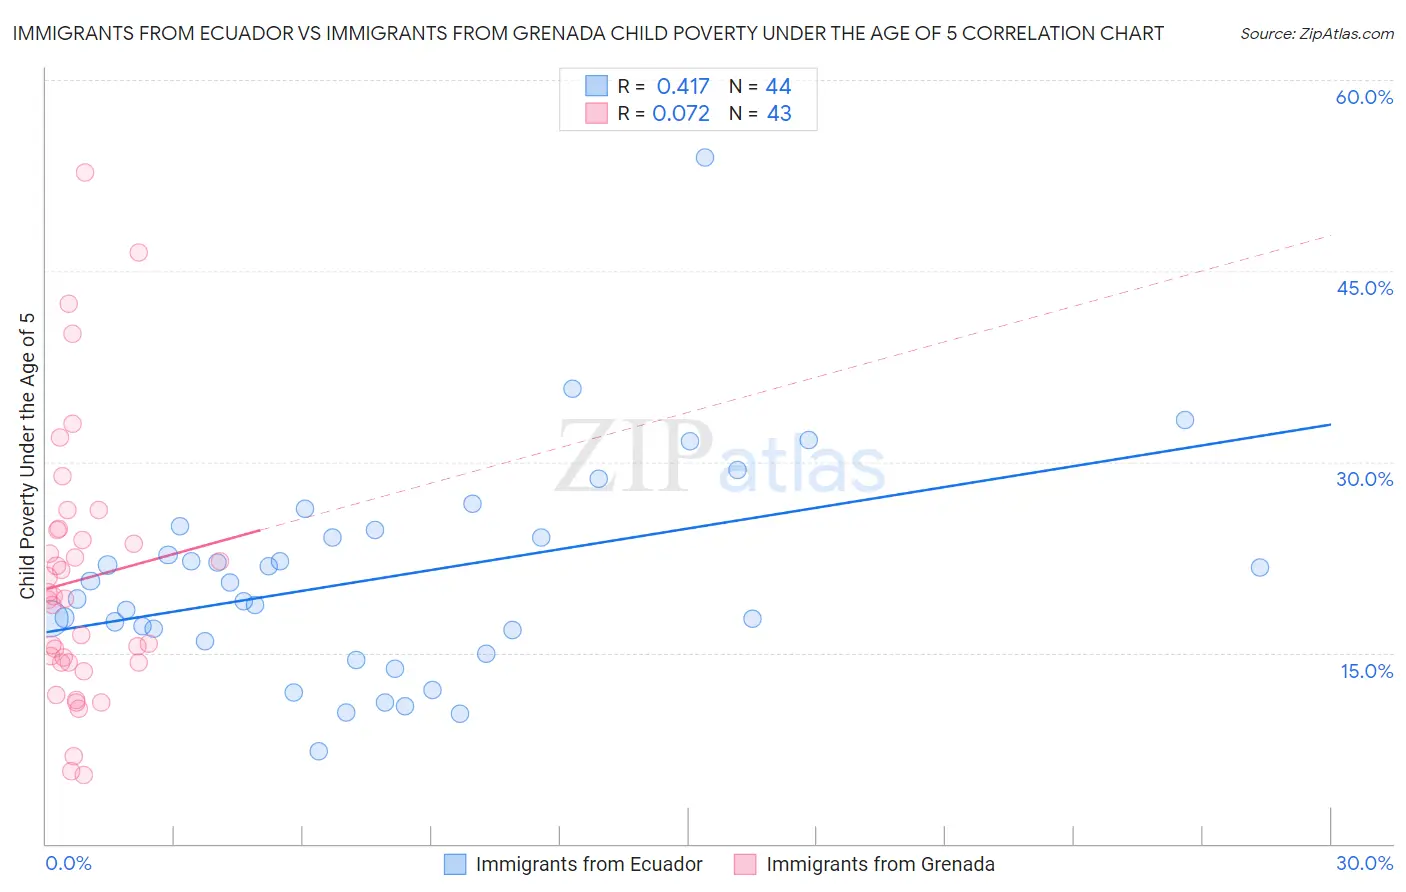 Immigrants from Ecuador vs Immigrants from Grenada Child Poverty Under the Age of 5